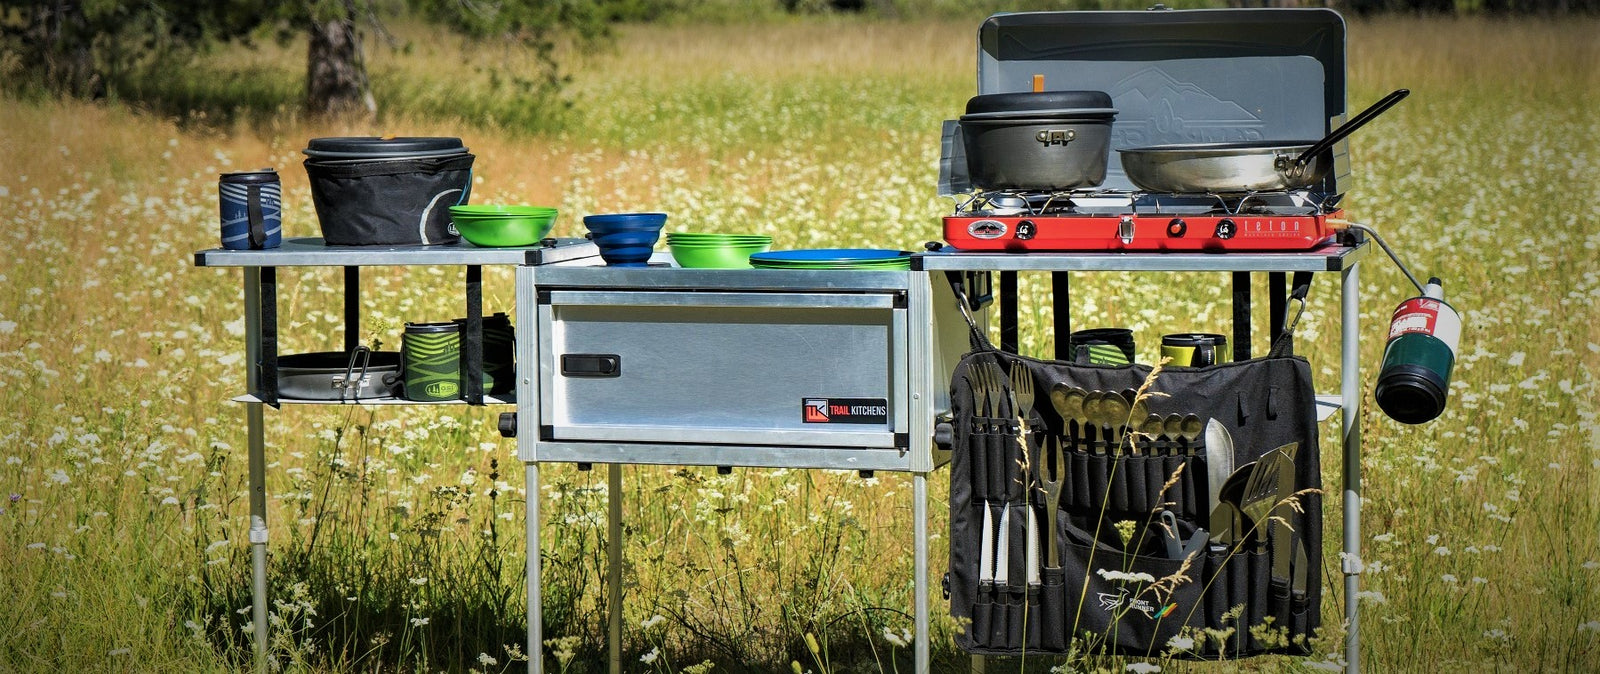 Kitchen in a box Camp Champ gives chefs all the tools they need